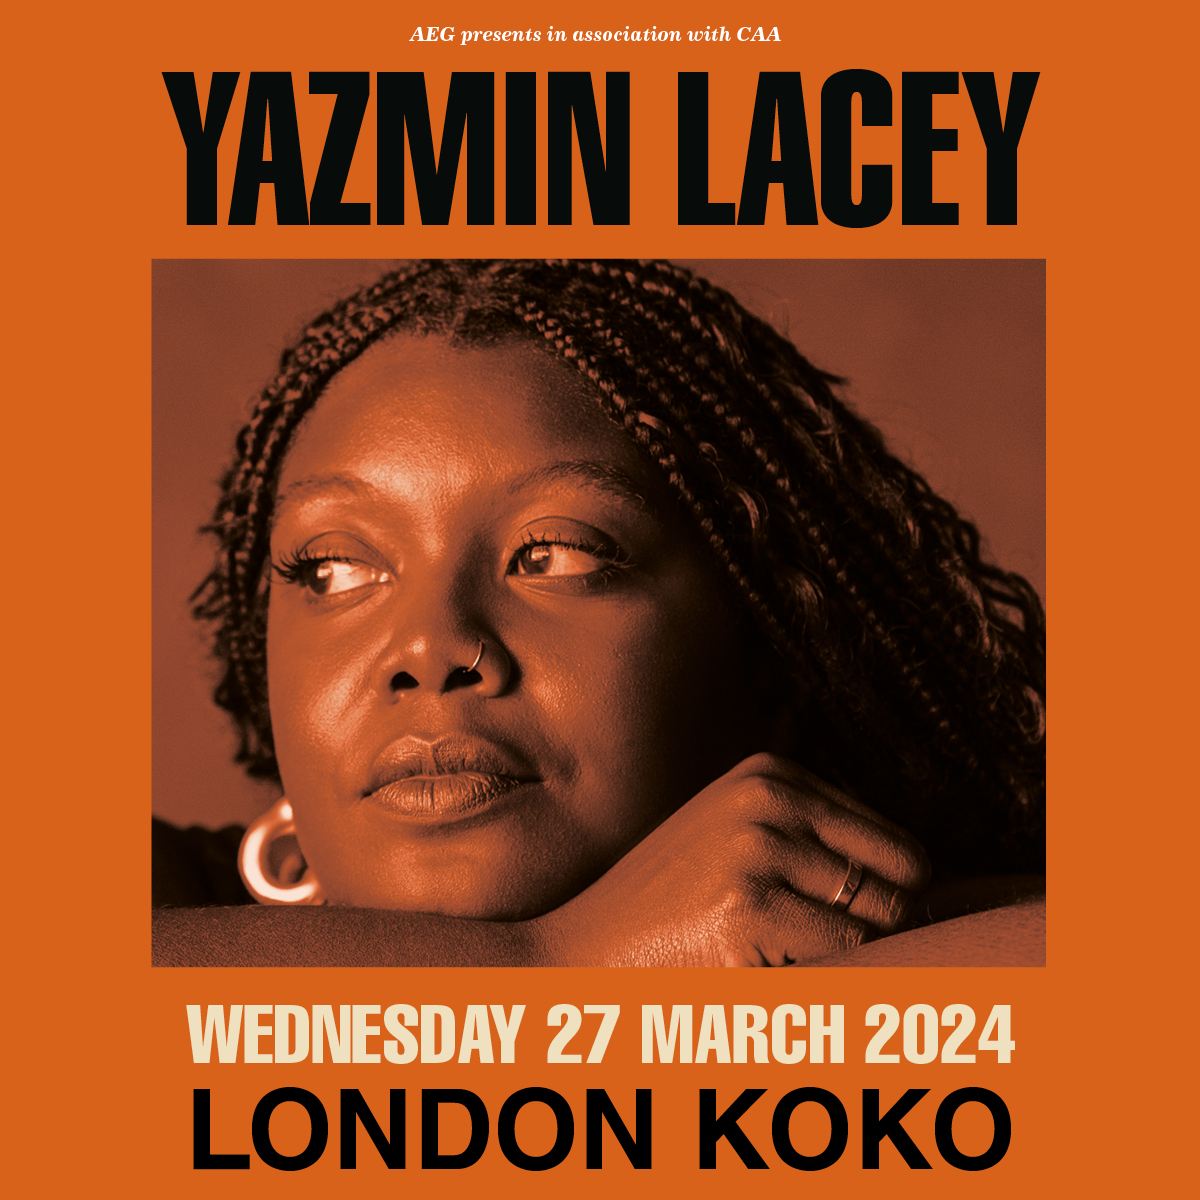 Tonight, we welcome soulful jazz sensation, @Yazmin_Lacey, to the #KOKO stage! Following a critically acclaimed run of shows, this is not one to be missed. Final tickets: news.koko.co.uk/140 #YazminLacey #KOKOLondon